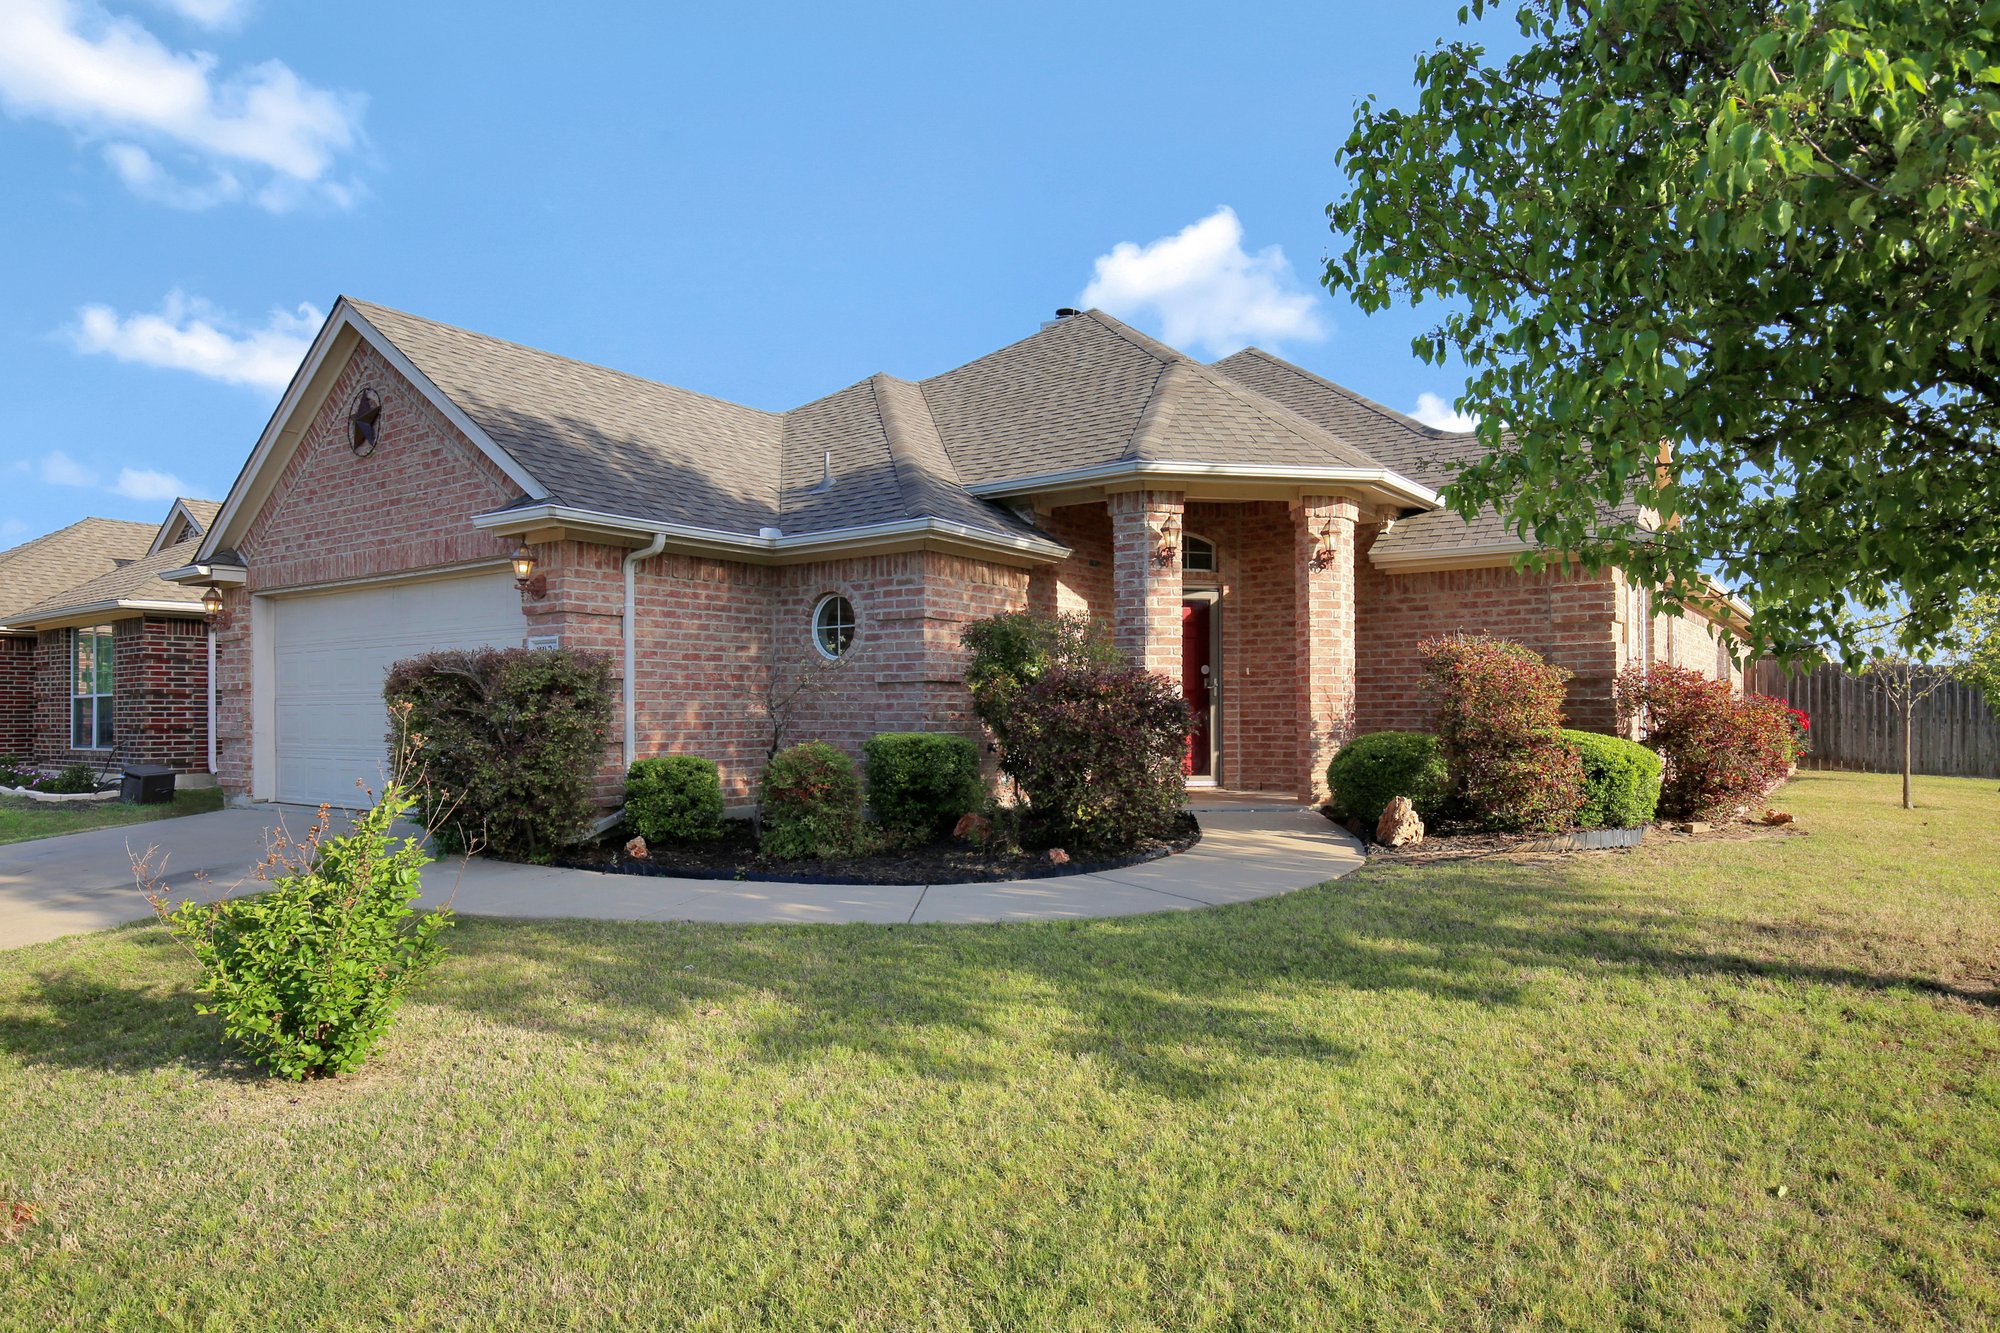 Photo 1 of 26 - 9029 River Falls Dr, Fort Worth, TX 76118